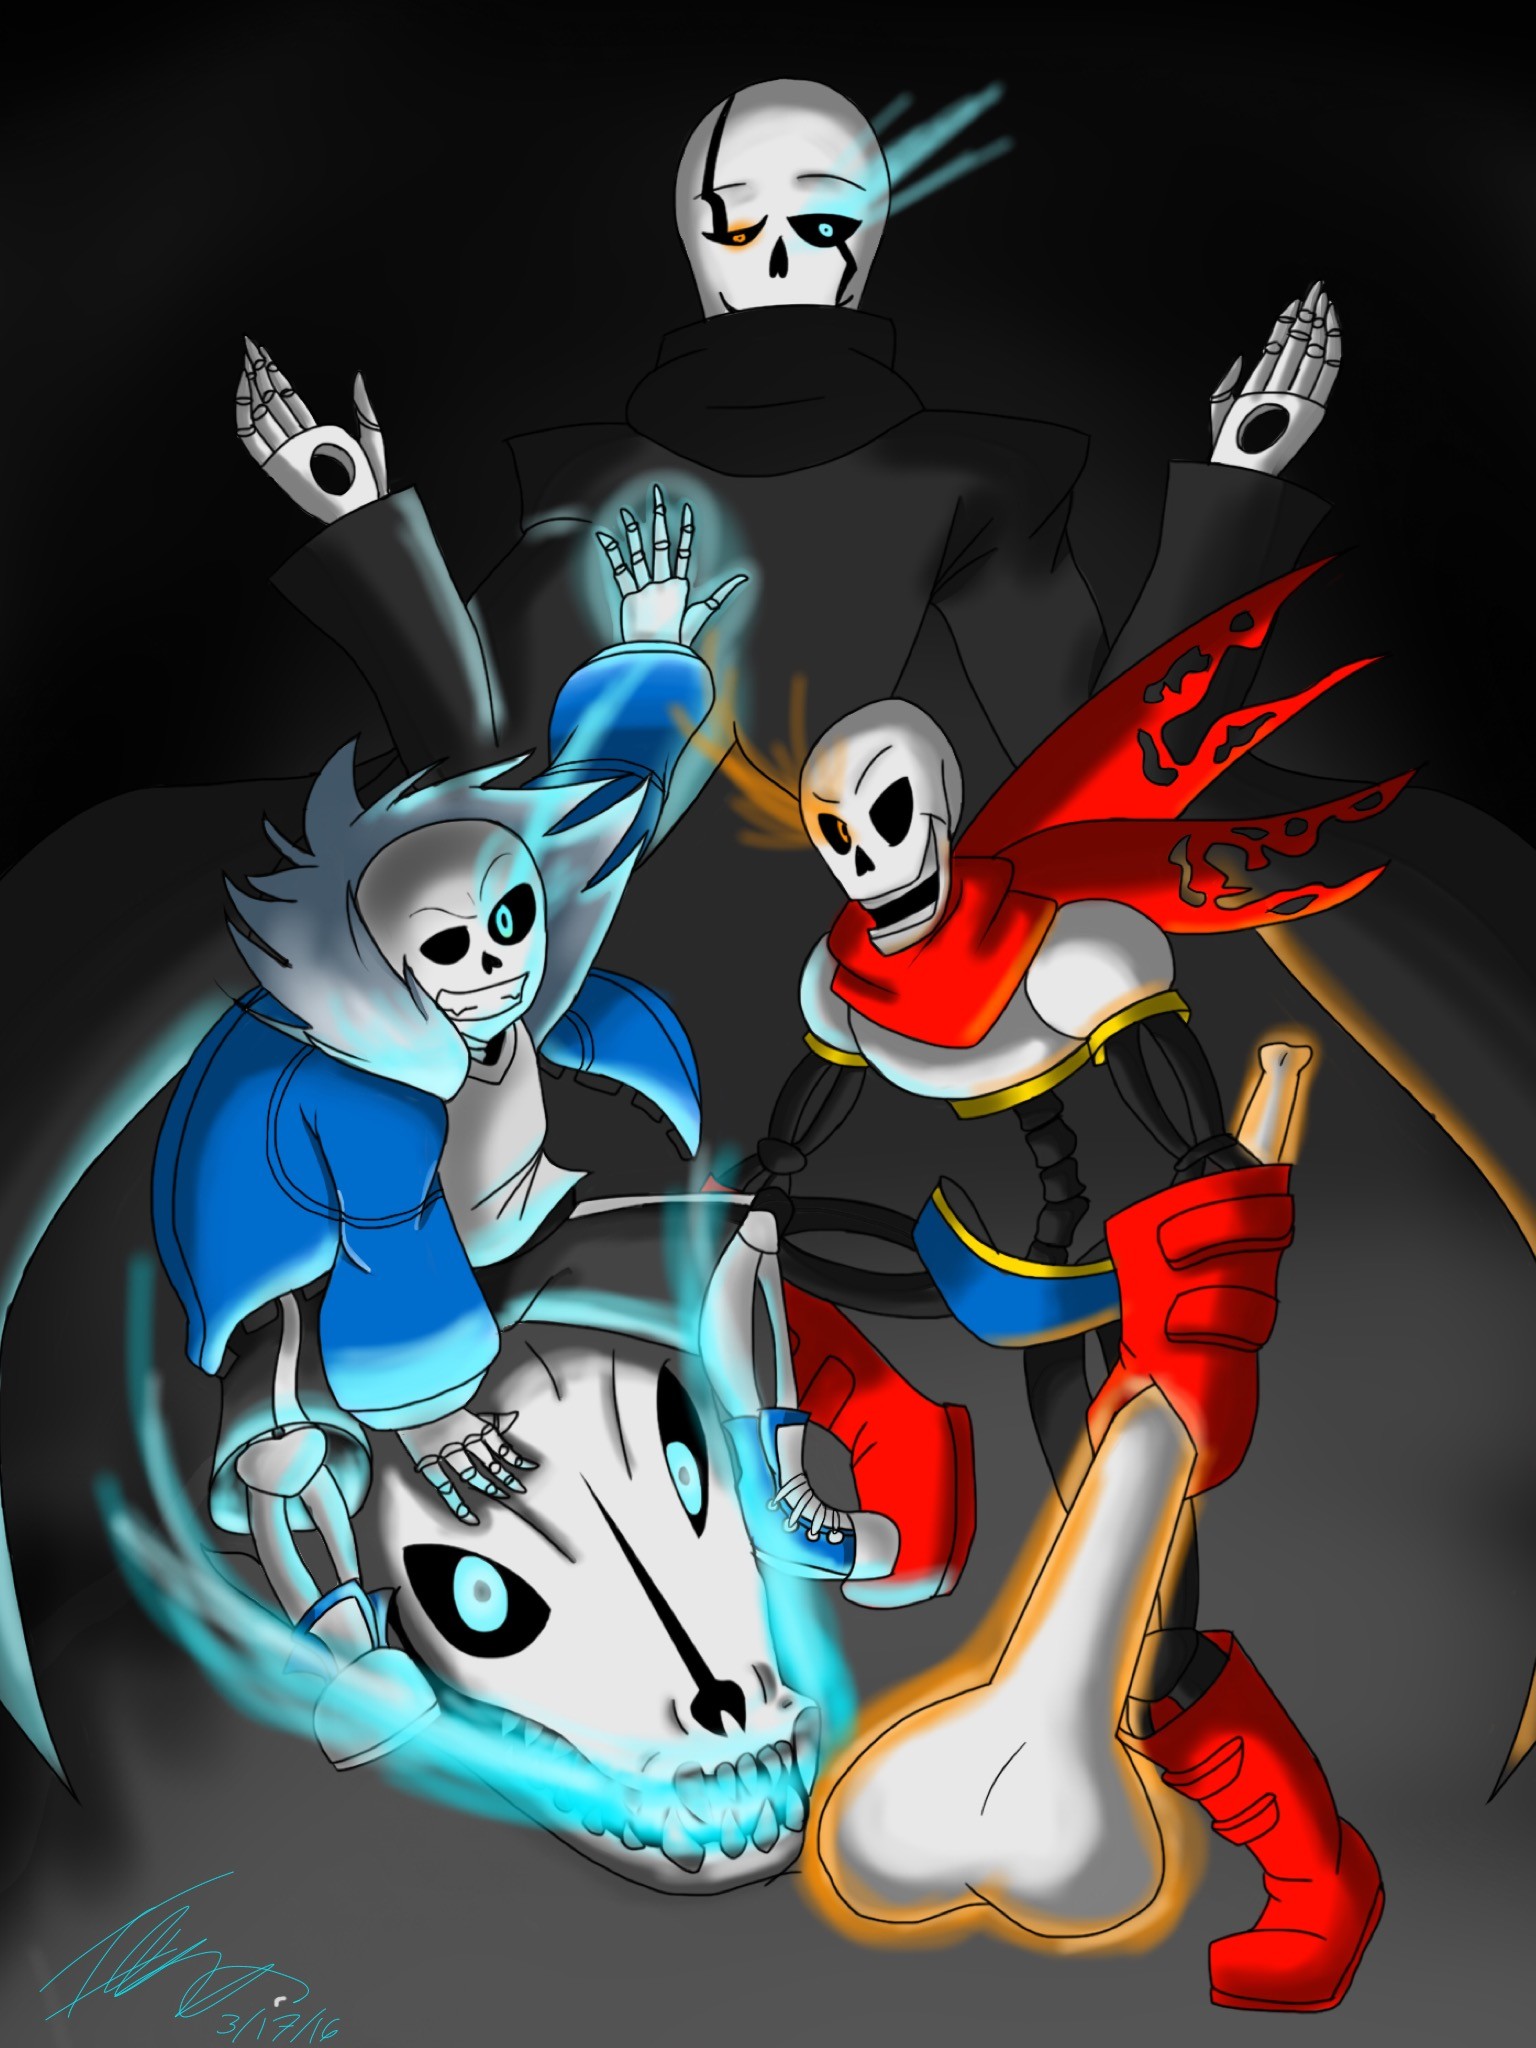 1536x2048 ...  Undertale Sans, Papyrus, and Gaster by Ithiliam on DeviantA